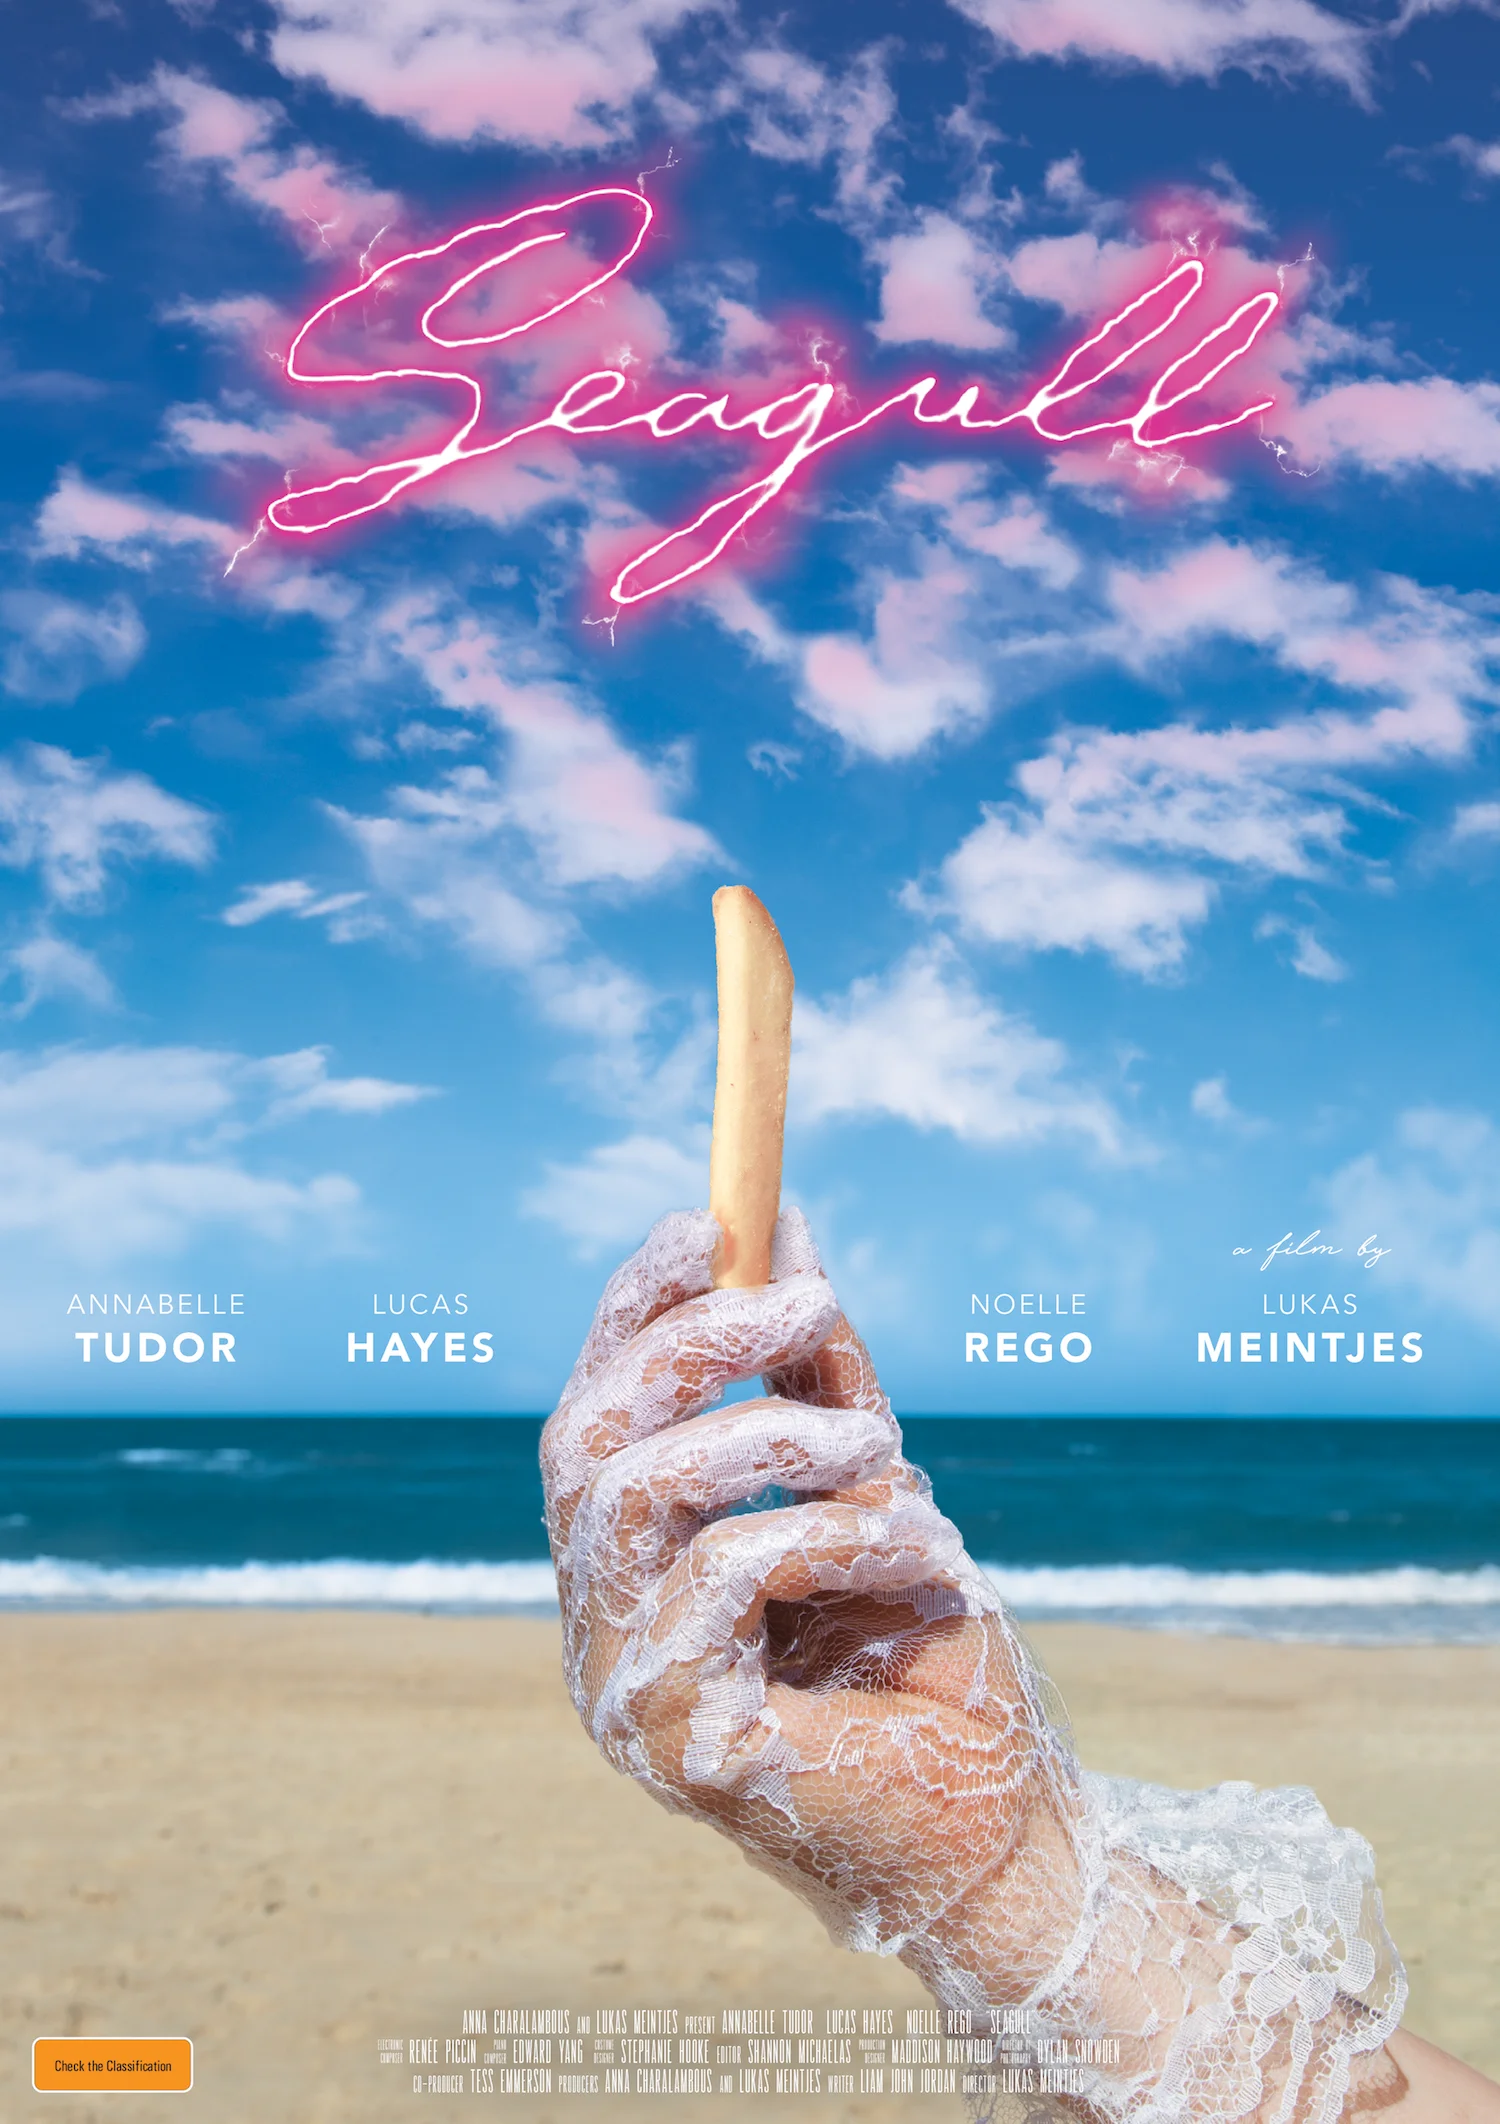 the films' poster: an lace gloved hand holds up a chip, a beach is in the background, the clouds look like a seagull